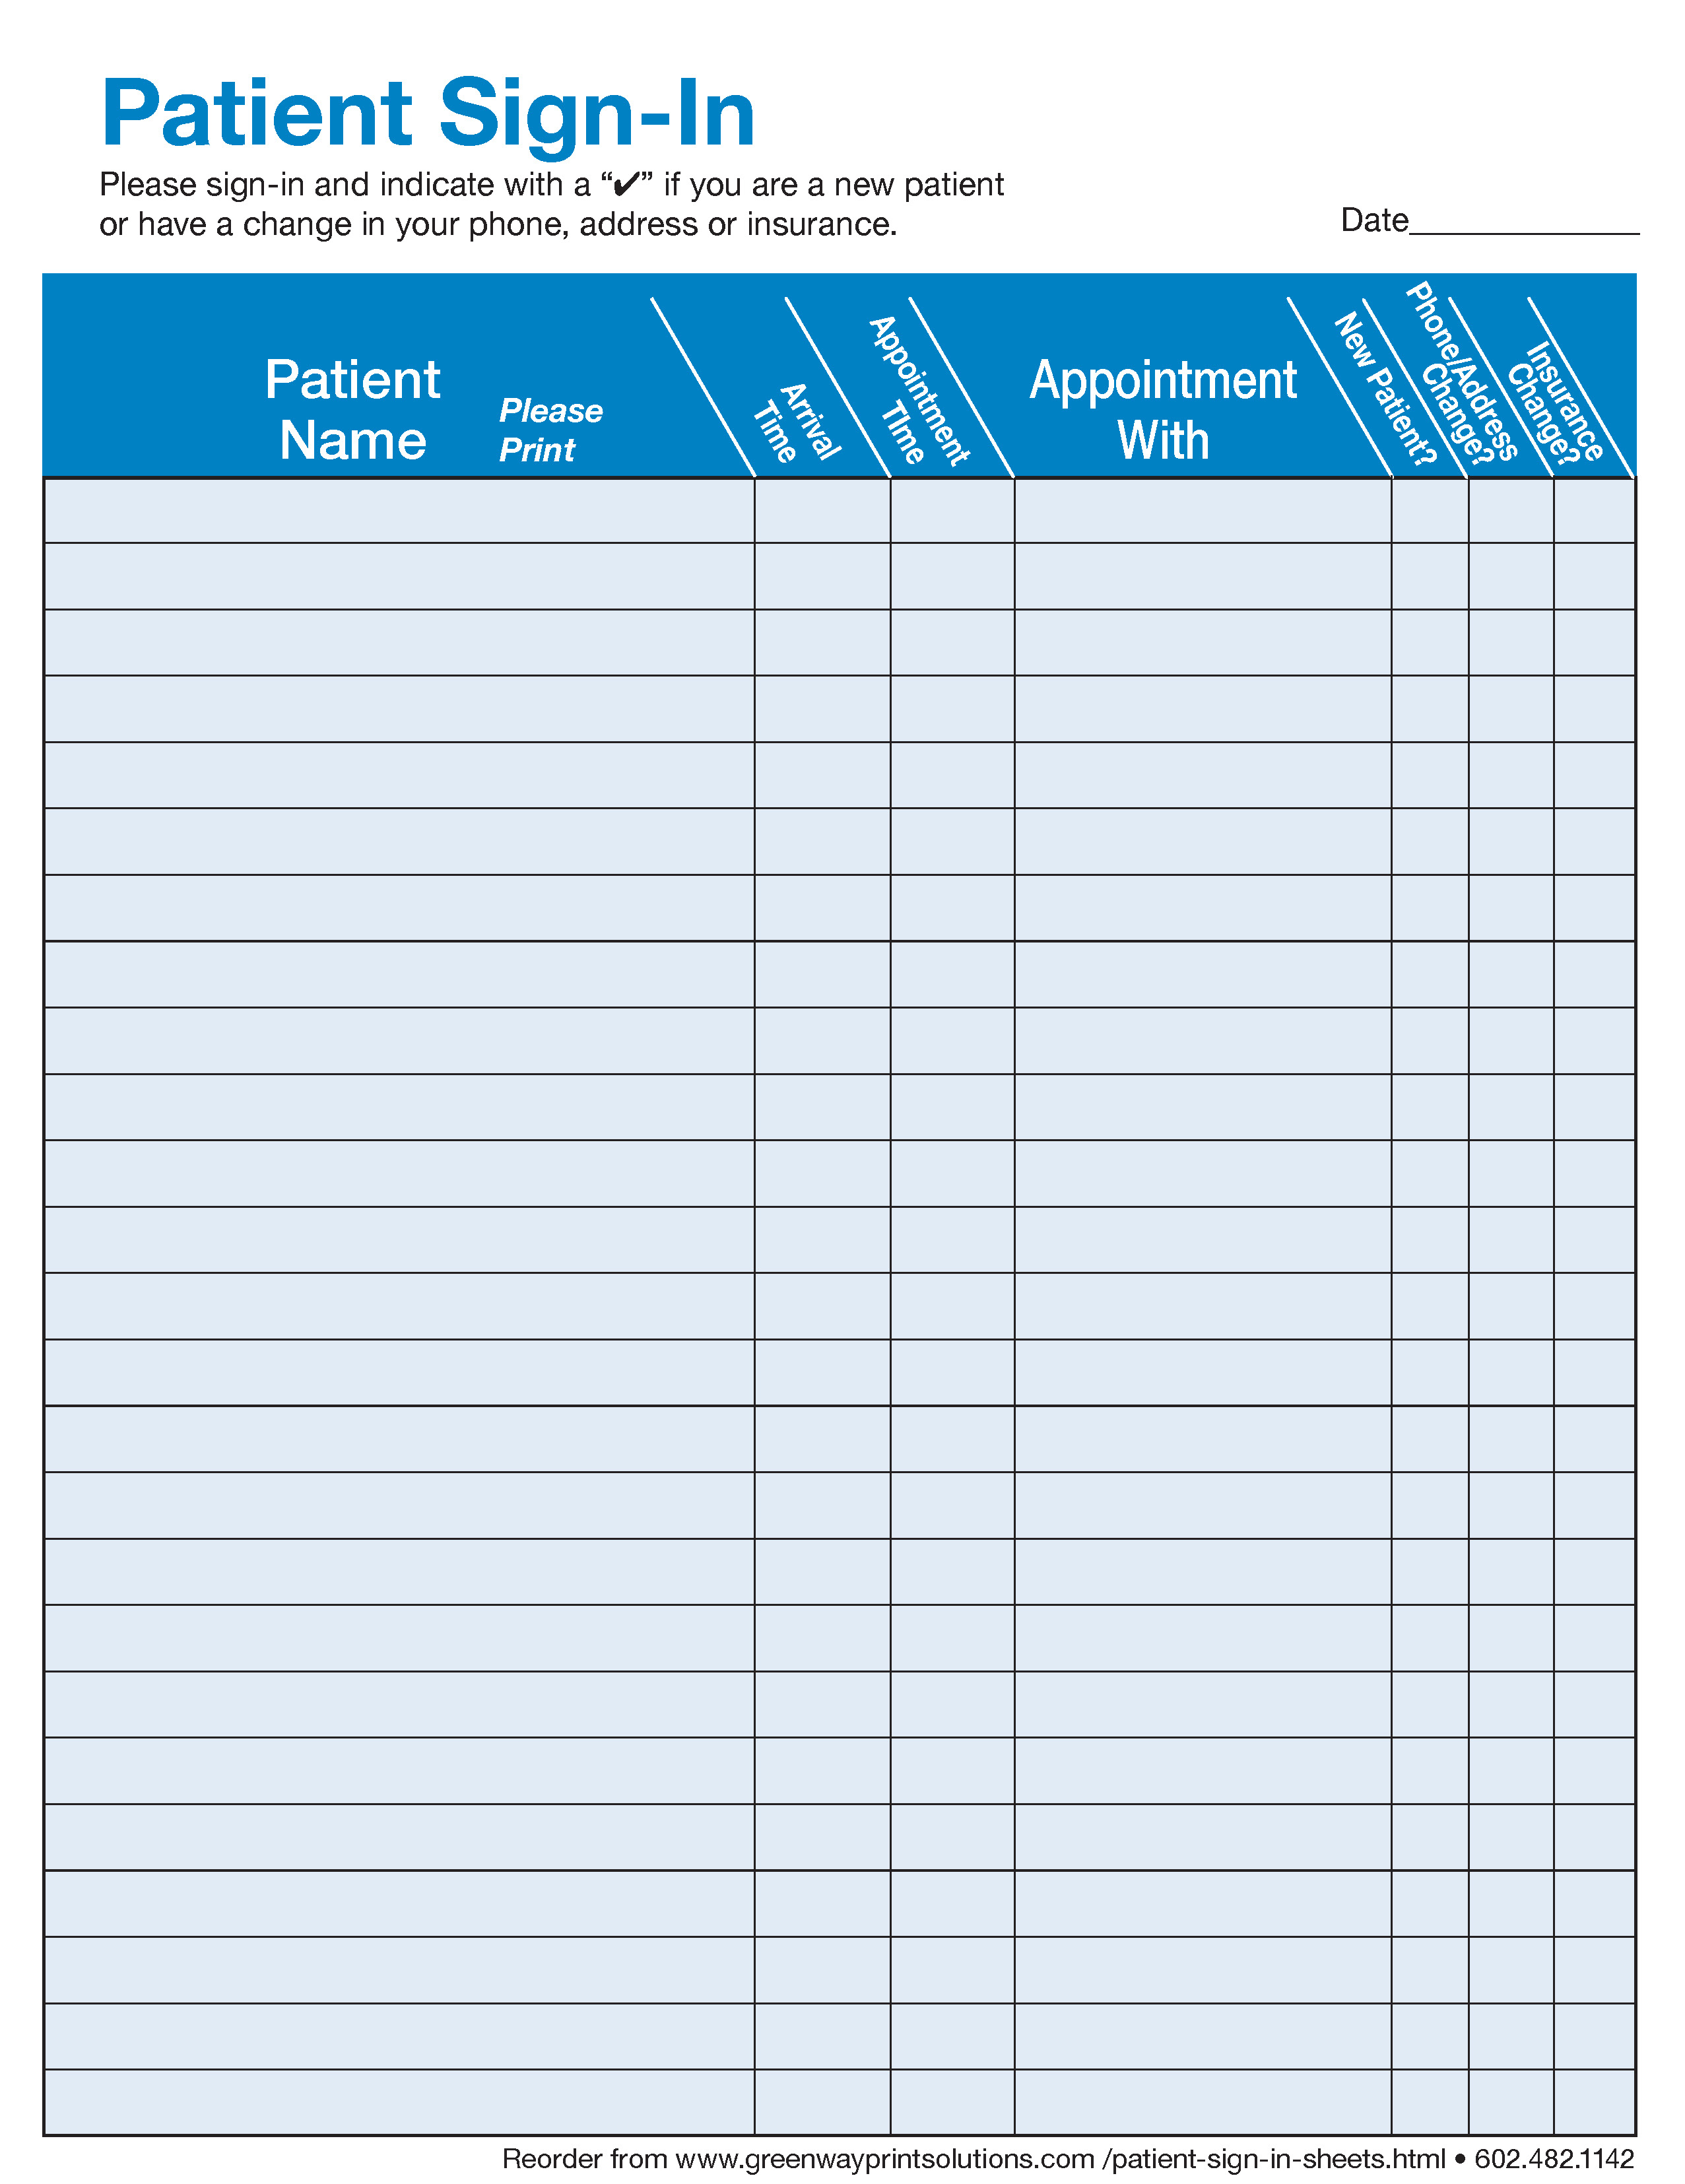 patient-sign-in-sheets-greenway-printing-promotional-products